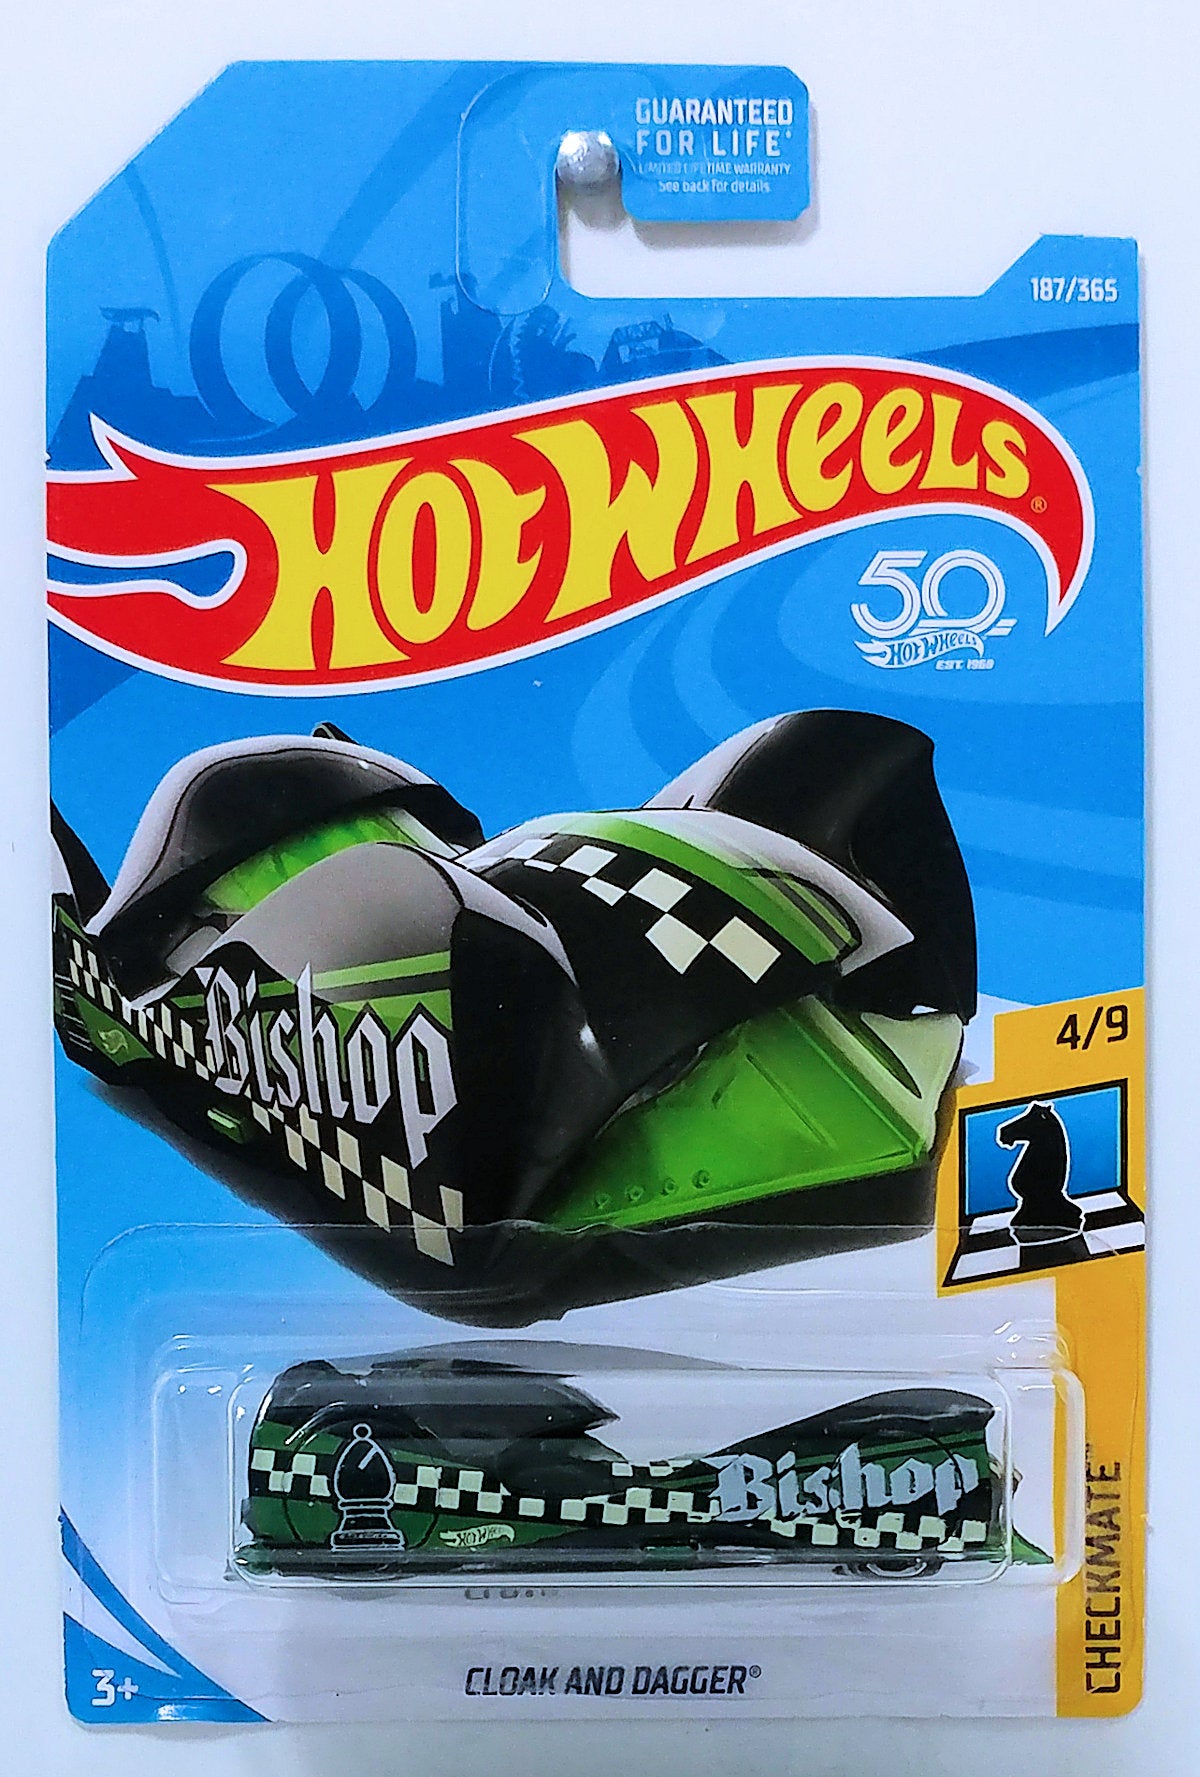 Hot Wheels 2018 - Collector # 187/365 - CheckMate Series 4/9 - Cloak And Dagger - Black - 50th Card